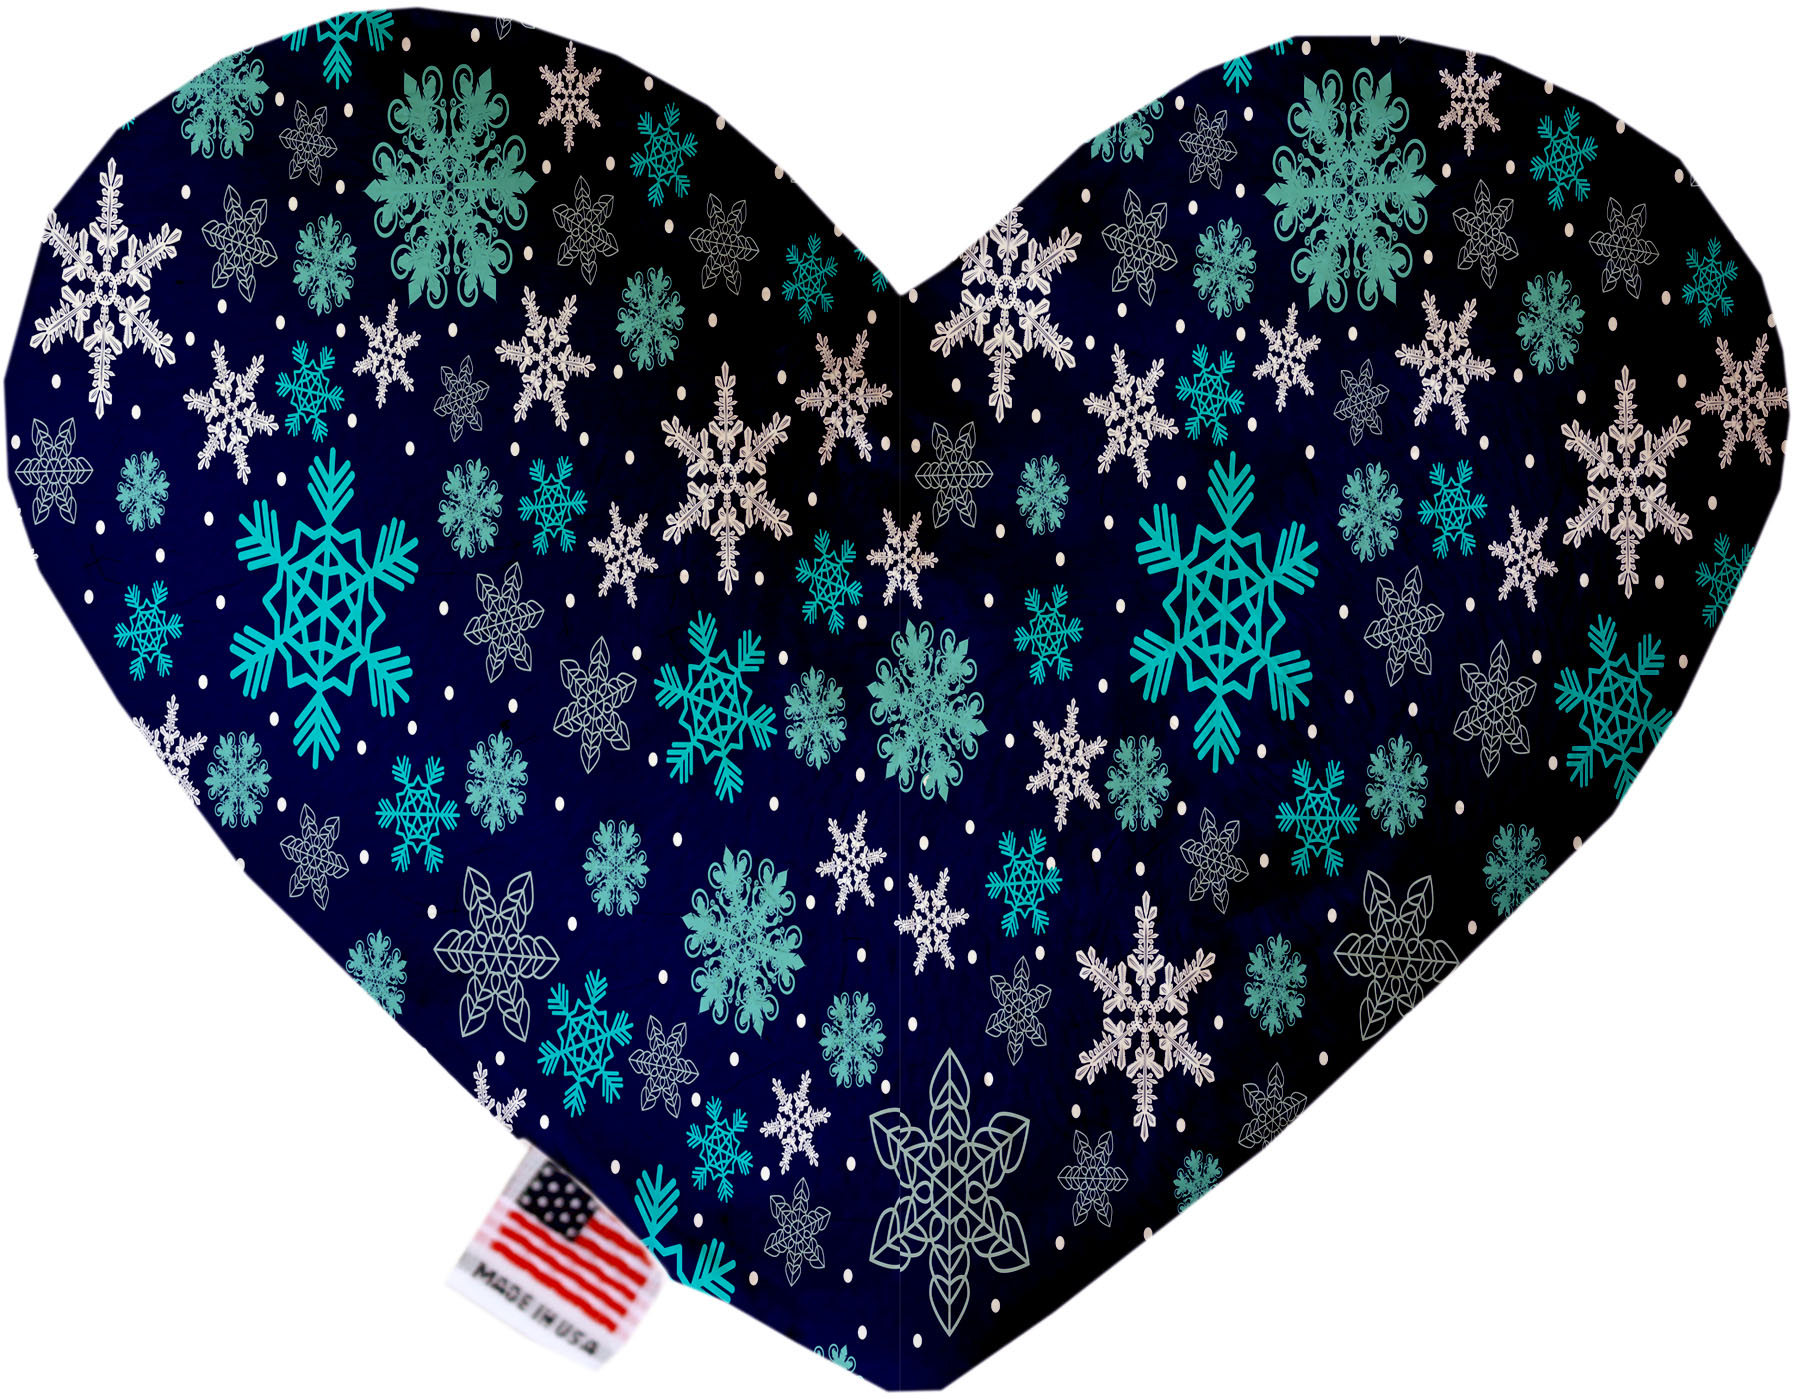 Snowflake Blues 6 Inch Heart Dog Toy